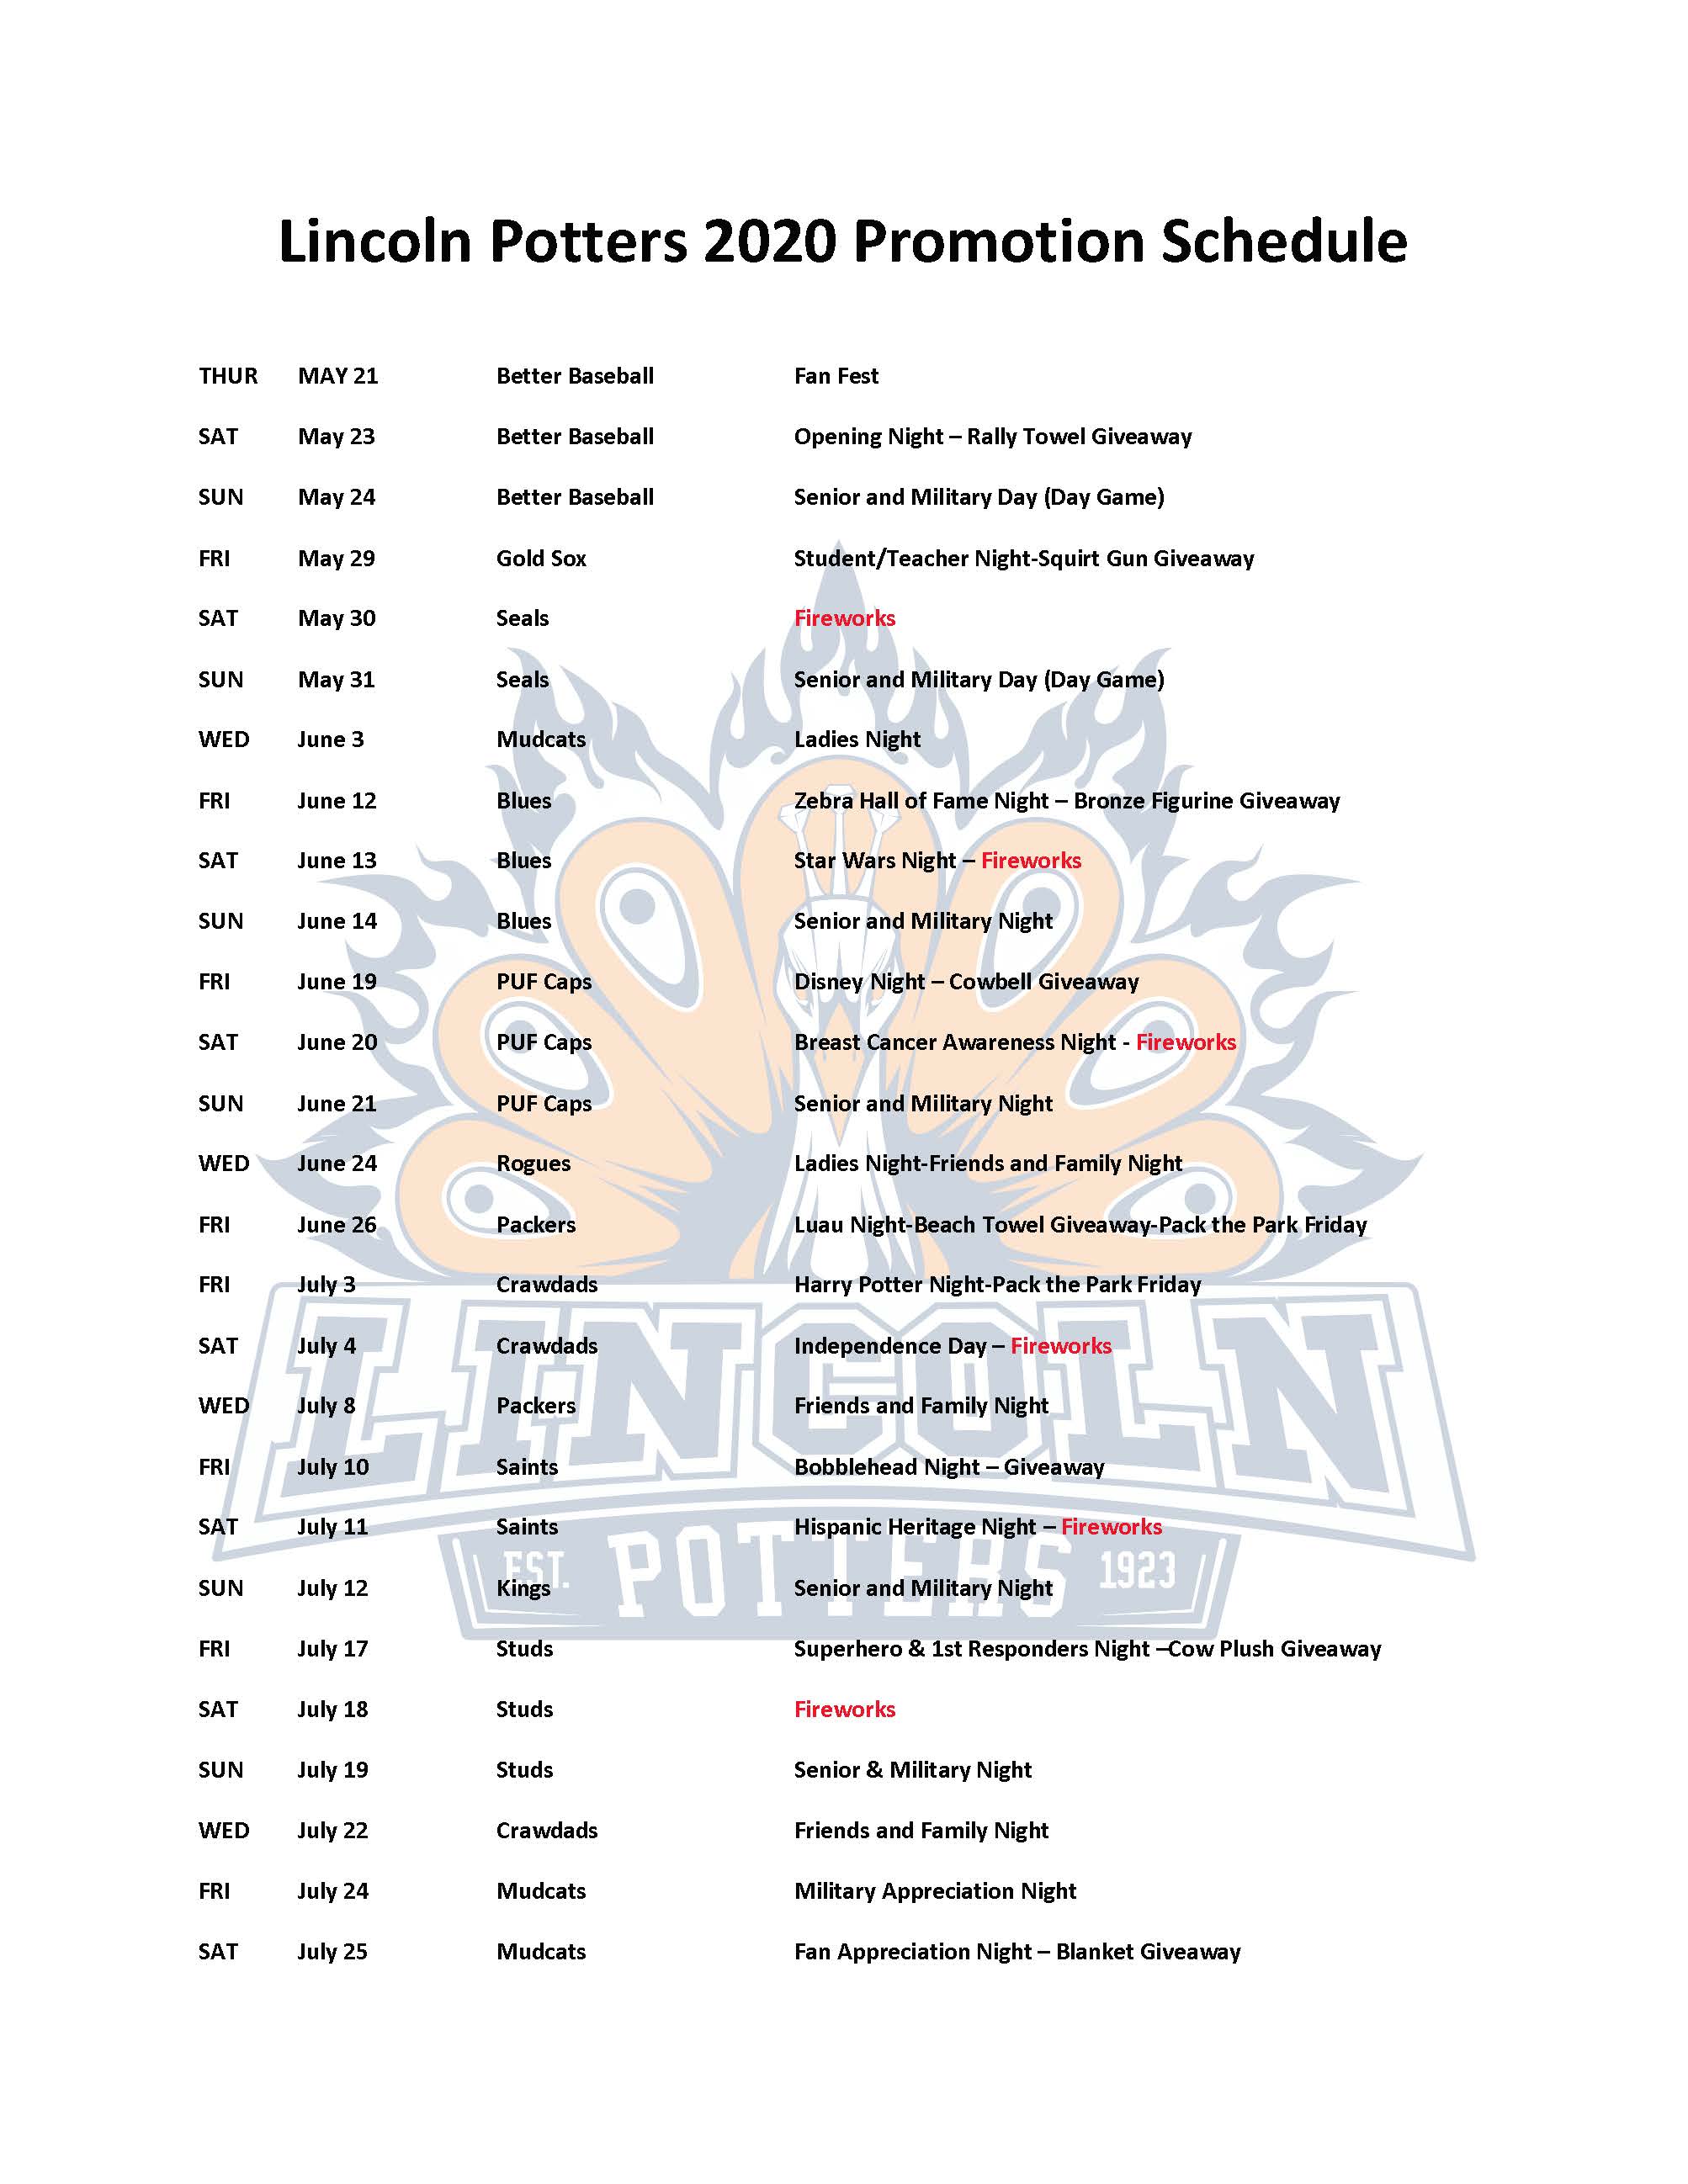 The Official Website of the Lincoln Potters Promotional Schedule